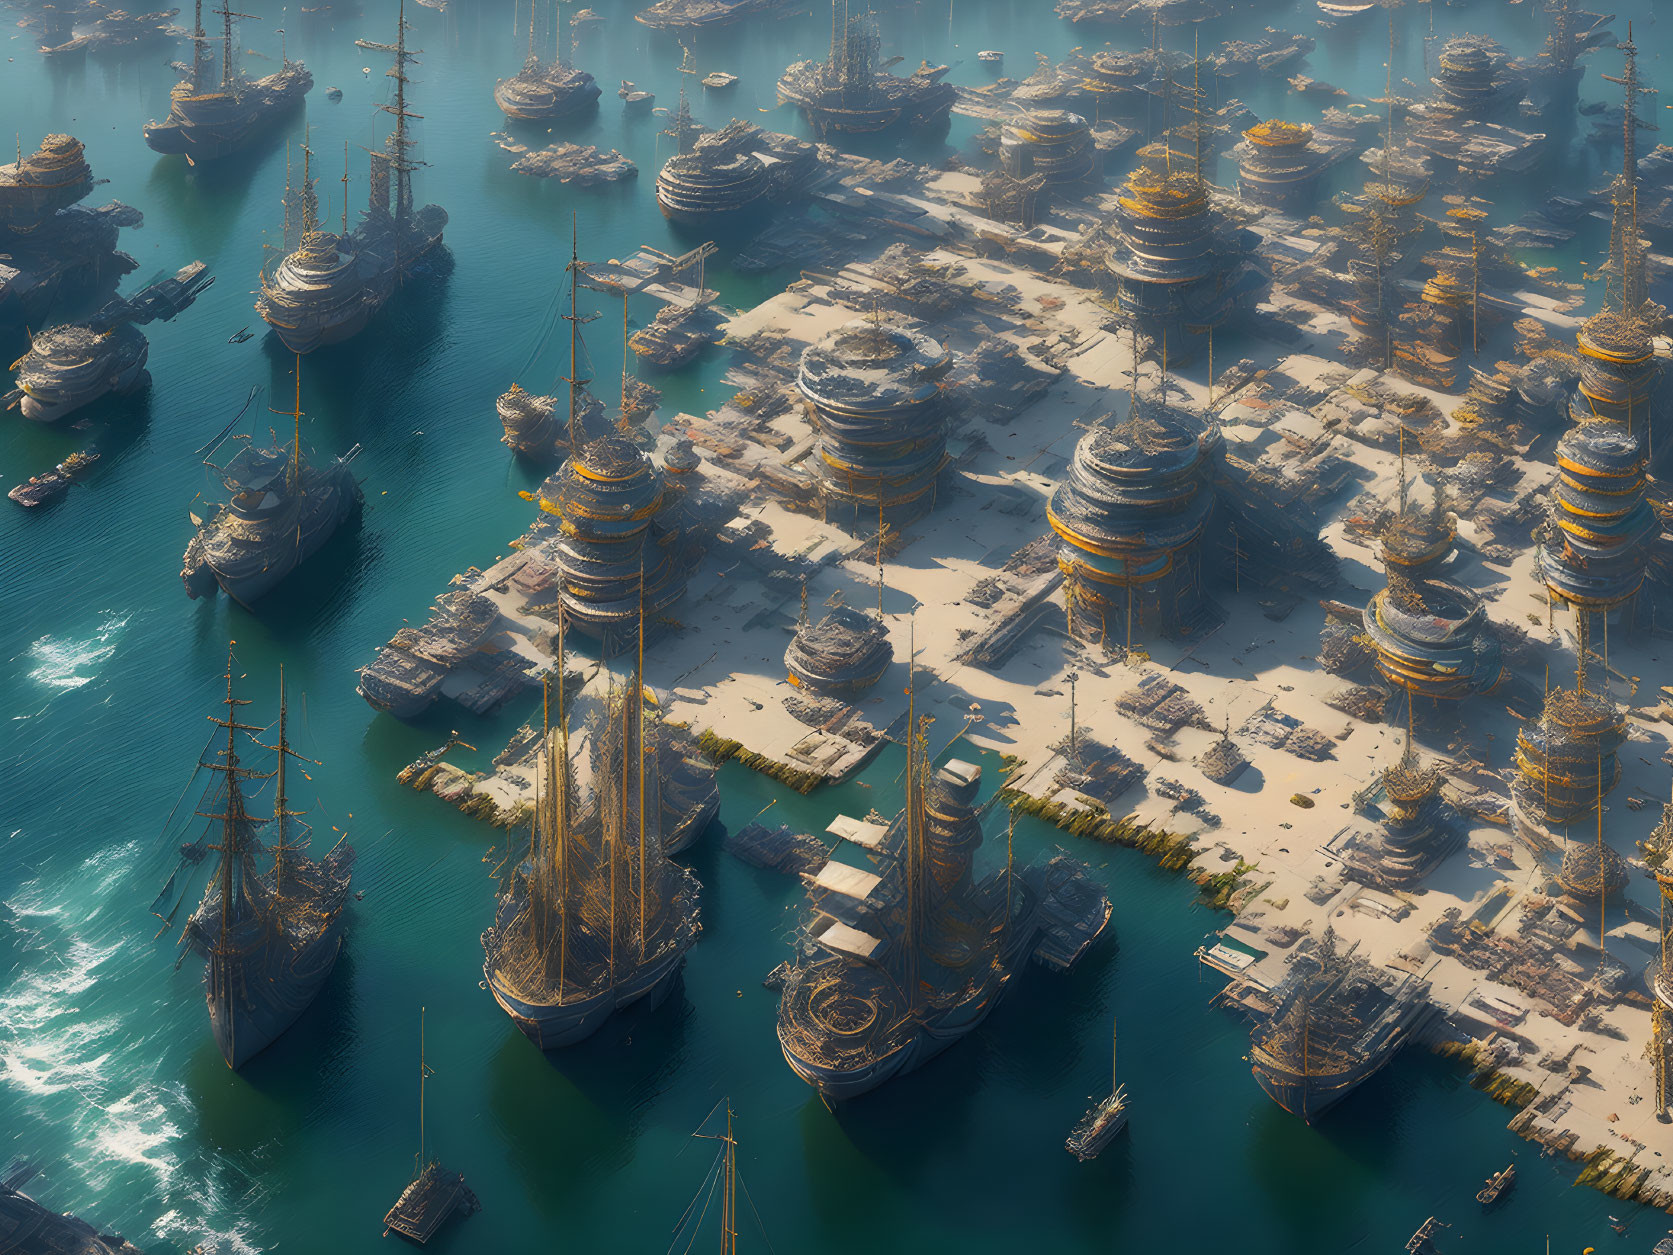 Futuristic port with towering structures and ships in golden sunlight